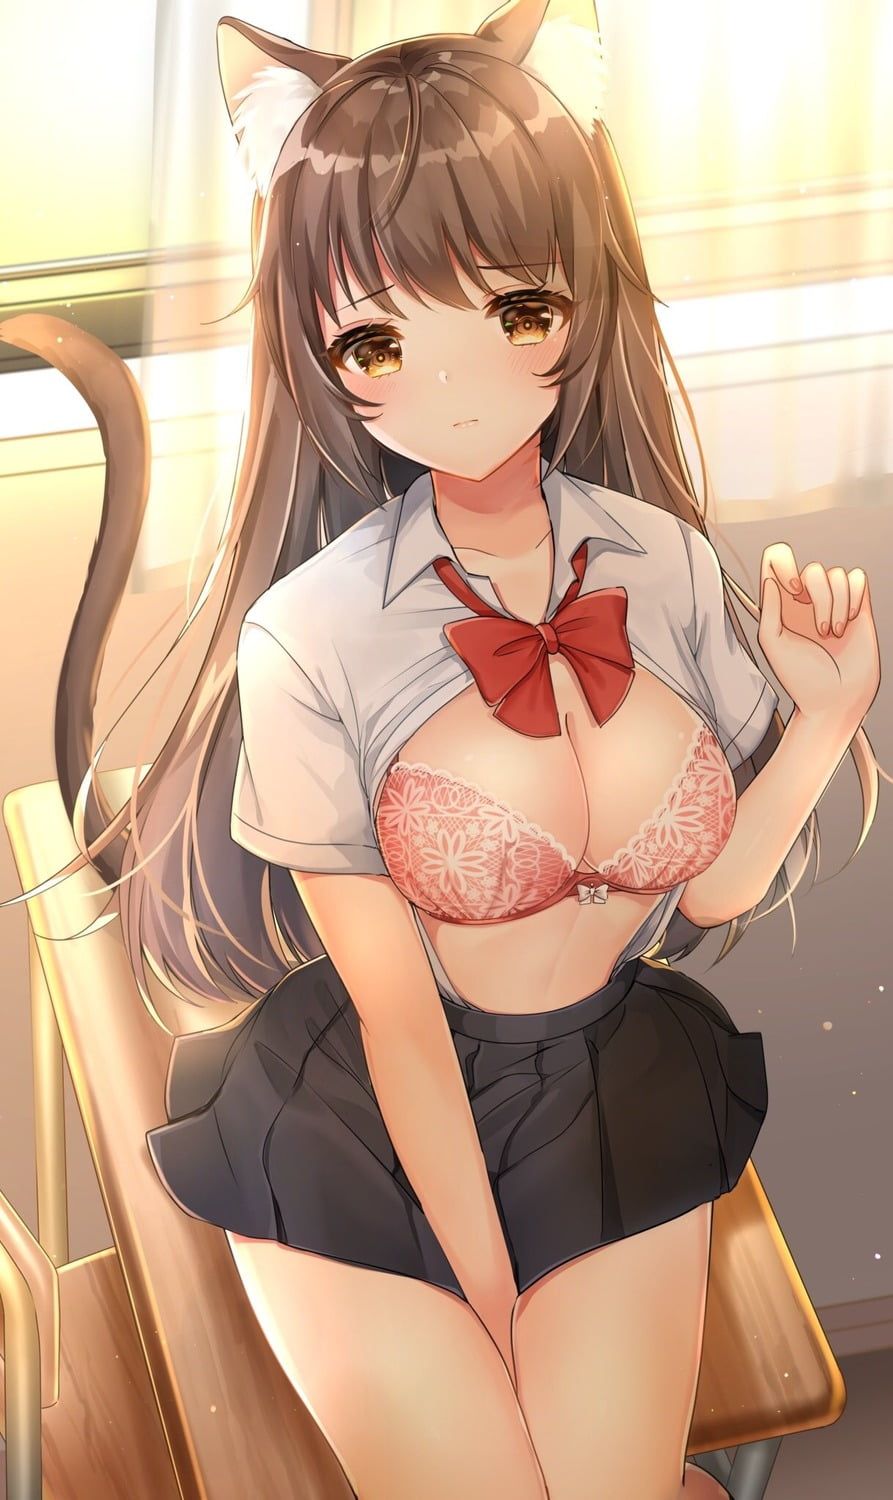 Uniform beautiful girl image feature that makes your chest swell just by looking at it 3